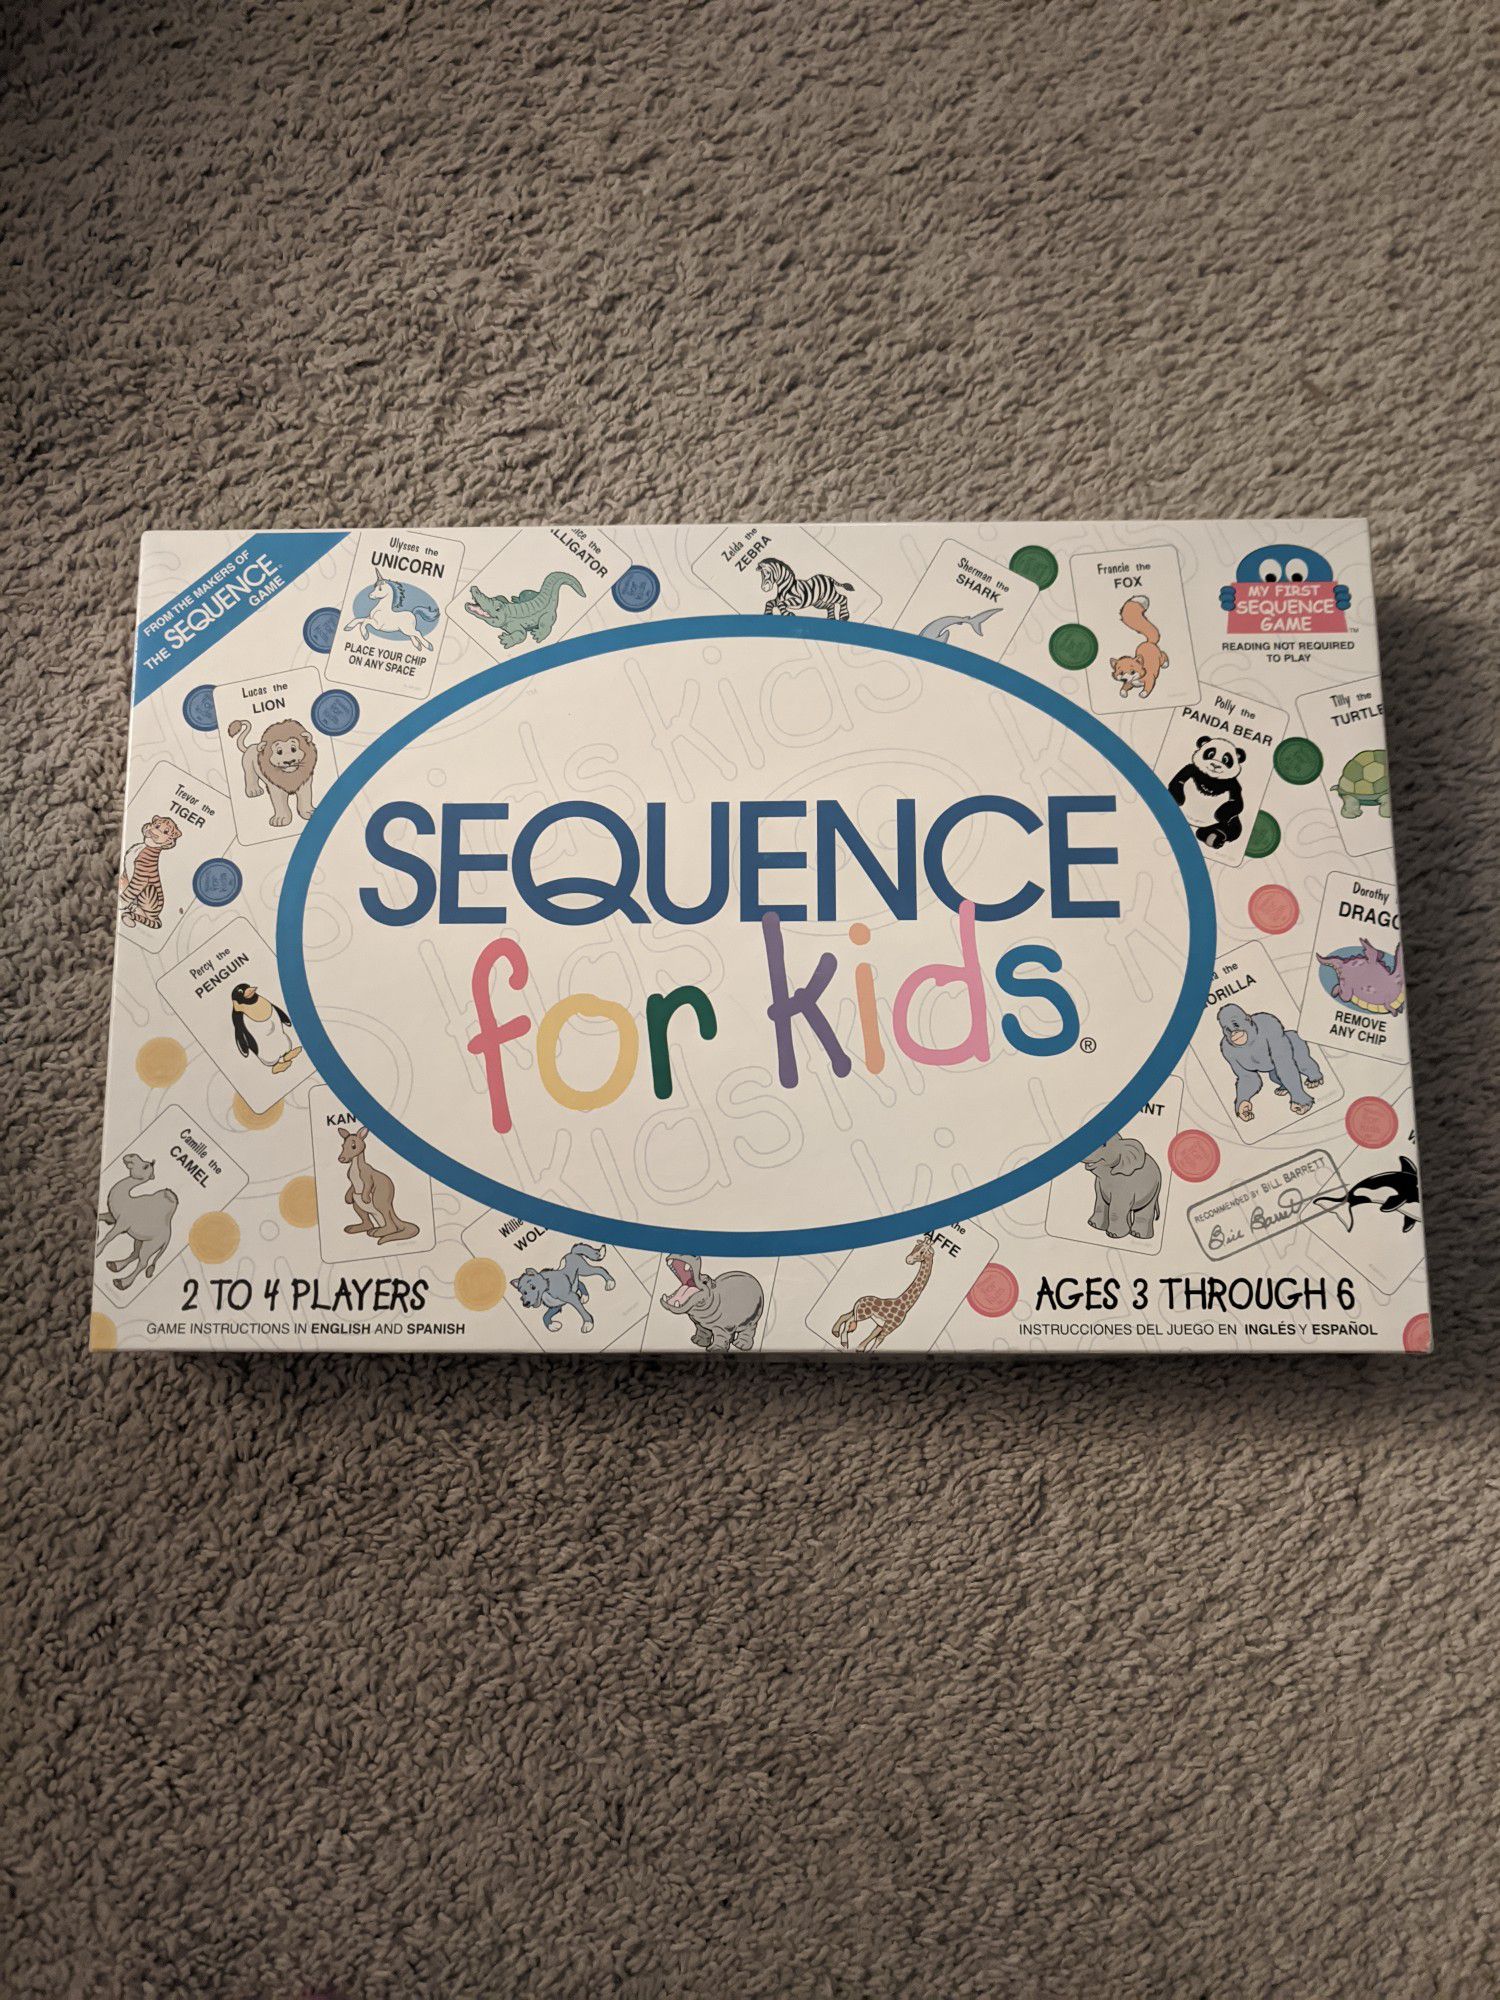 New Sequence for Kids board game